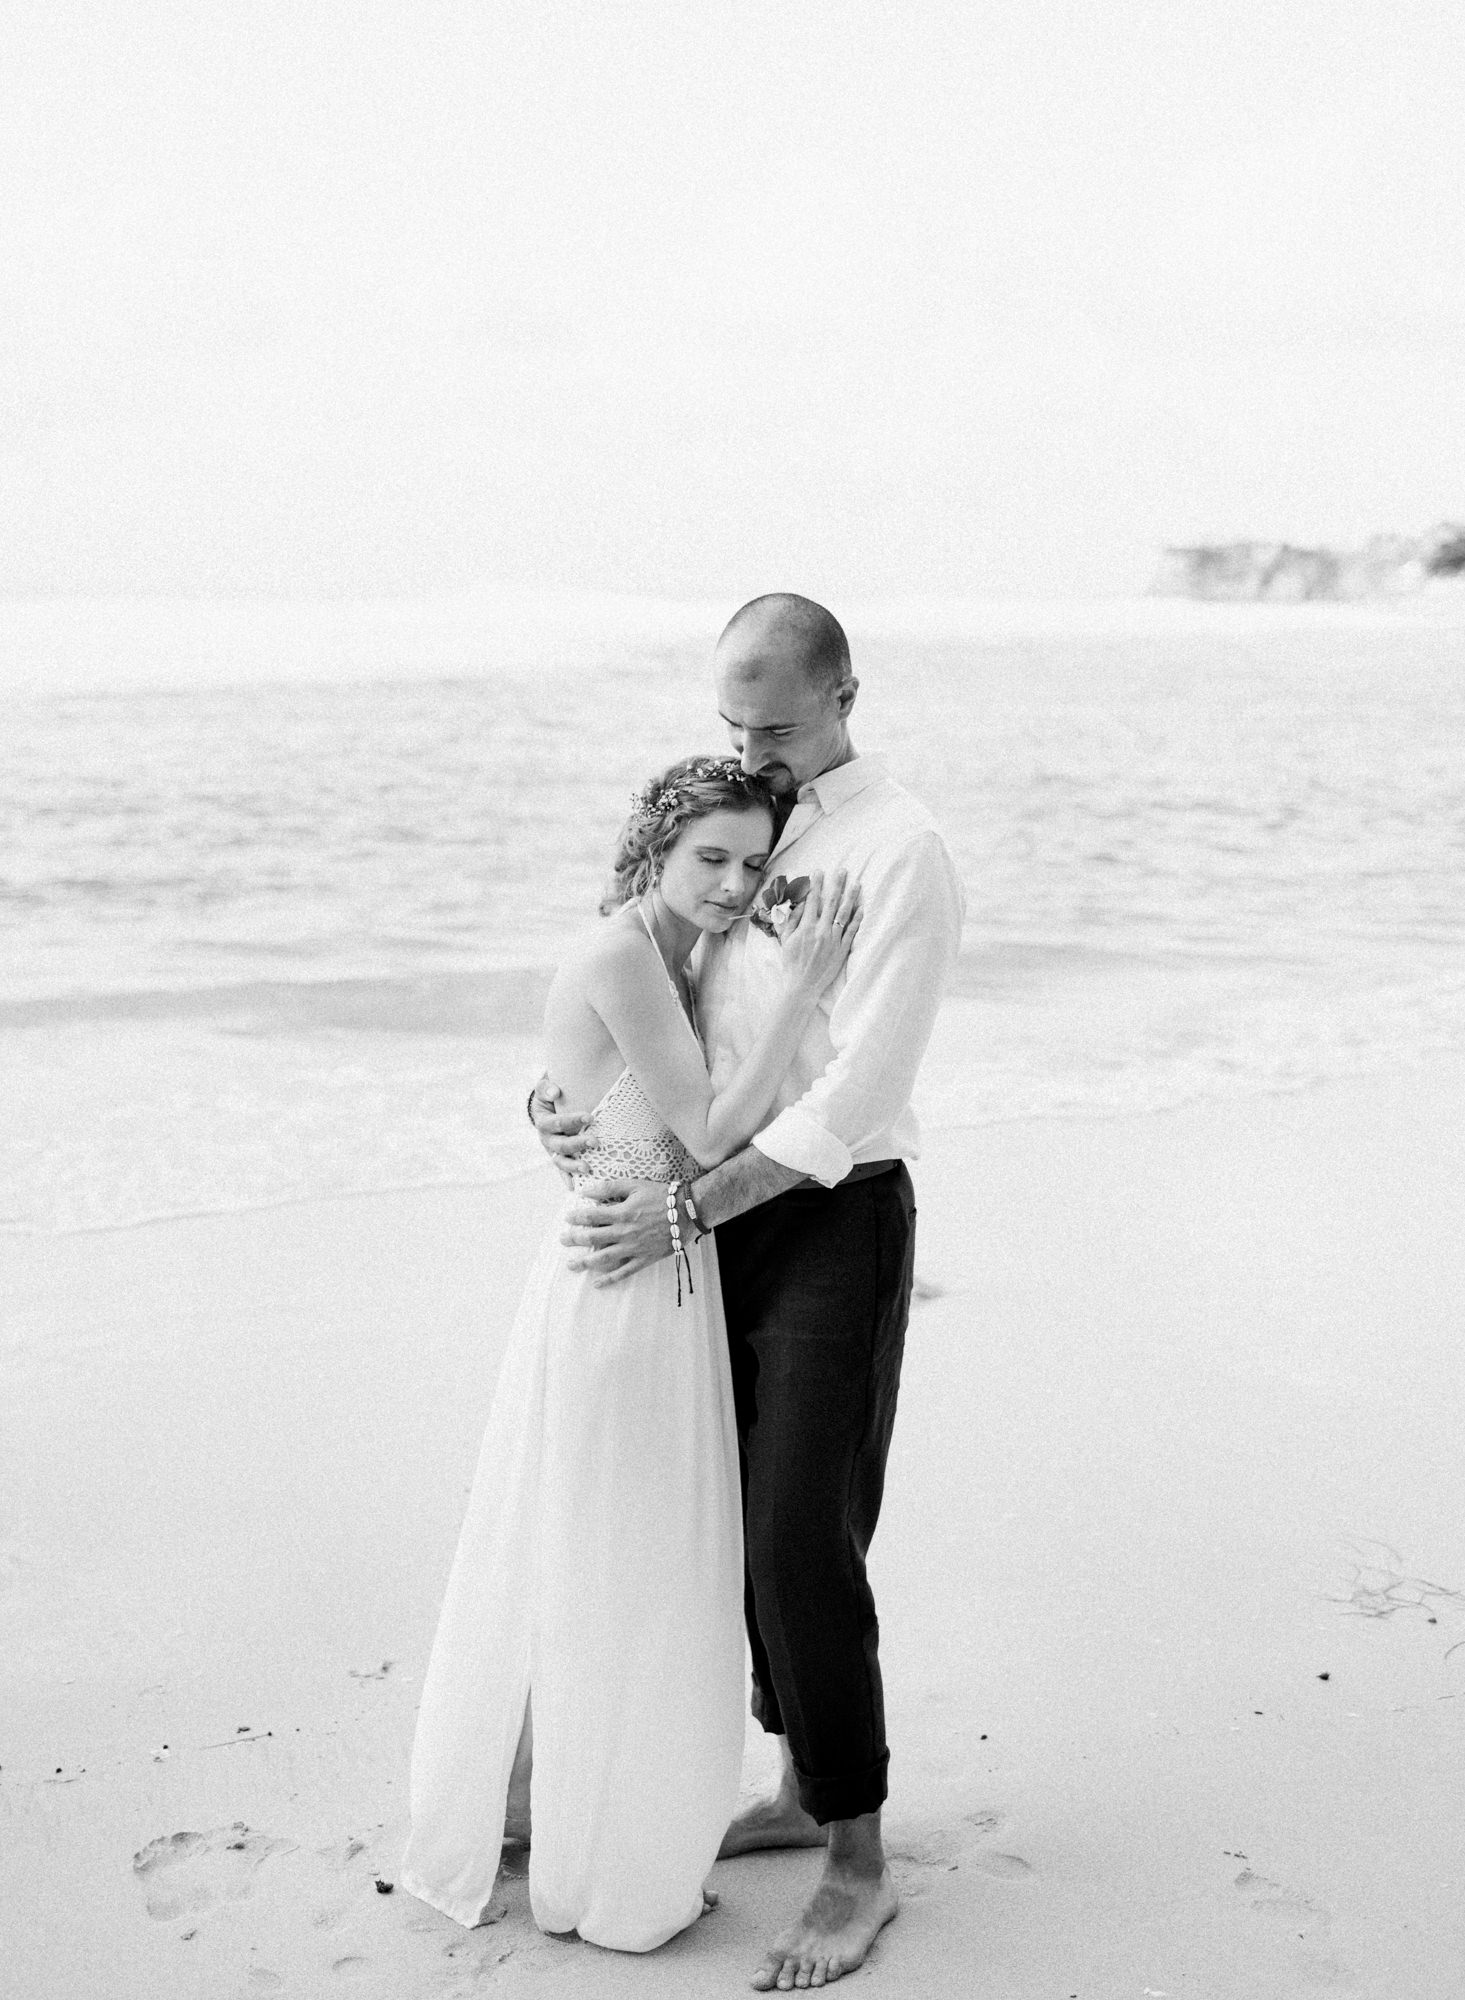 Bali elopement in New Kuta Golf in black and white